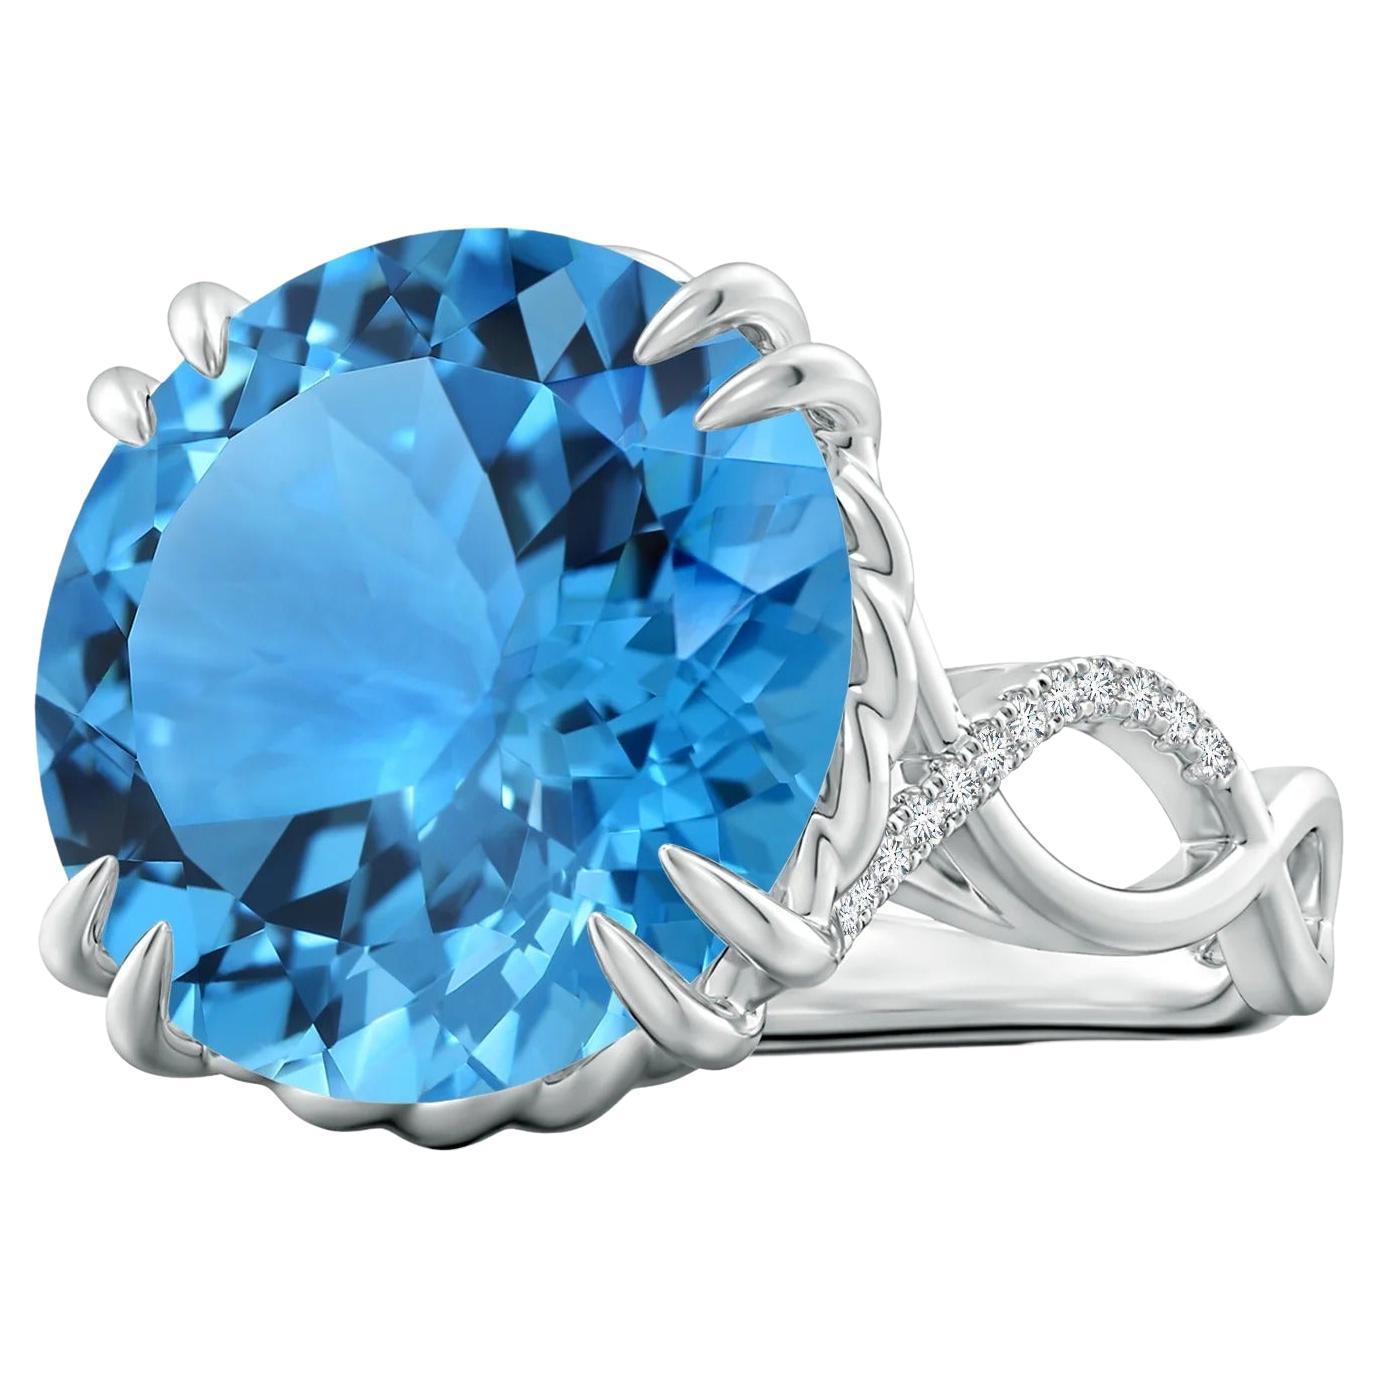 For Sale:  Angara GIA Certified Natural Swiss Blue Topaz Cocktail Ring in White Gold